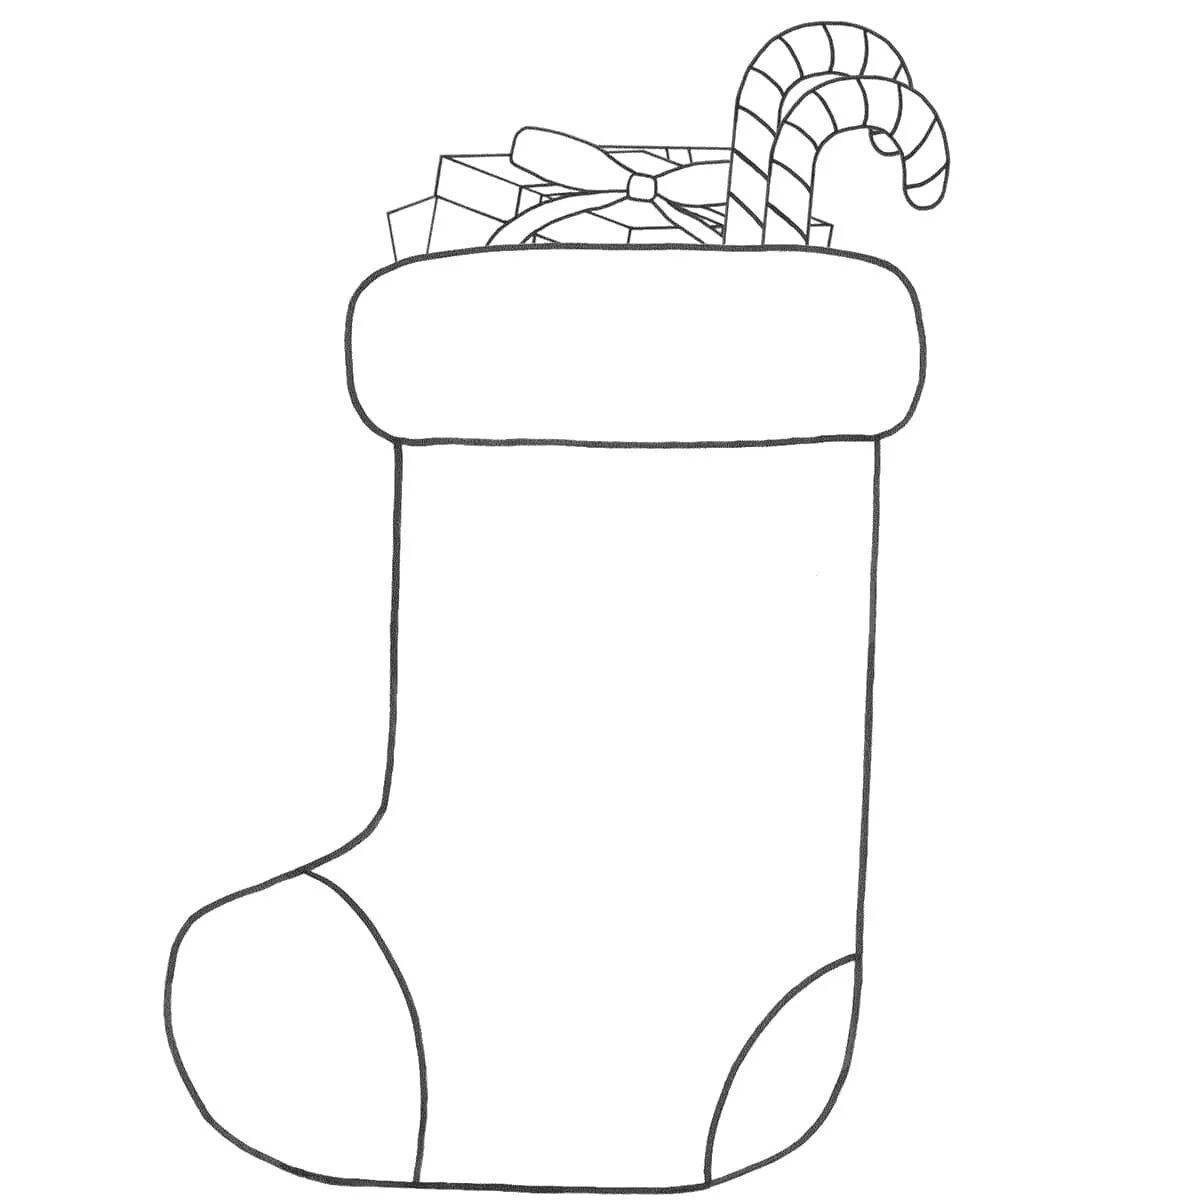 Coloring book shiny stockings